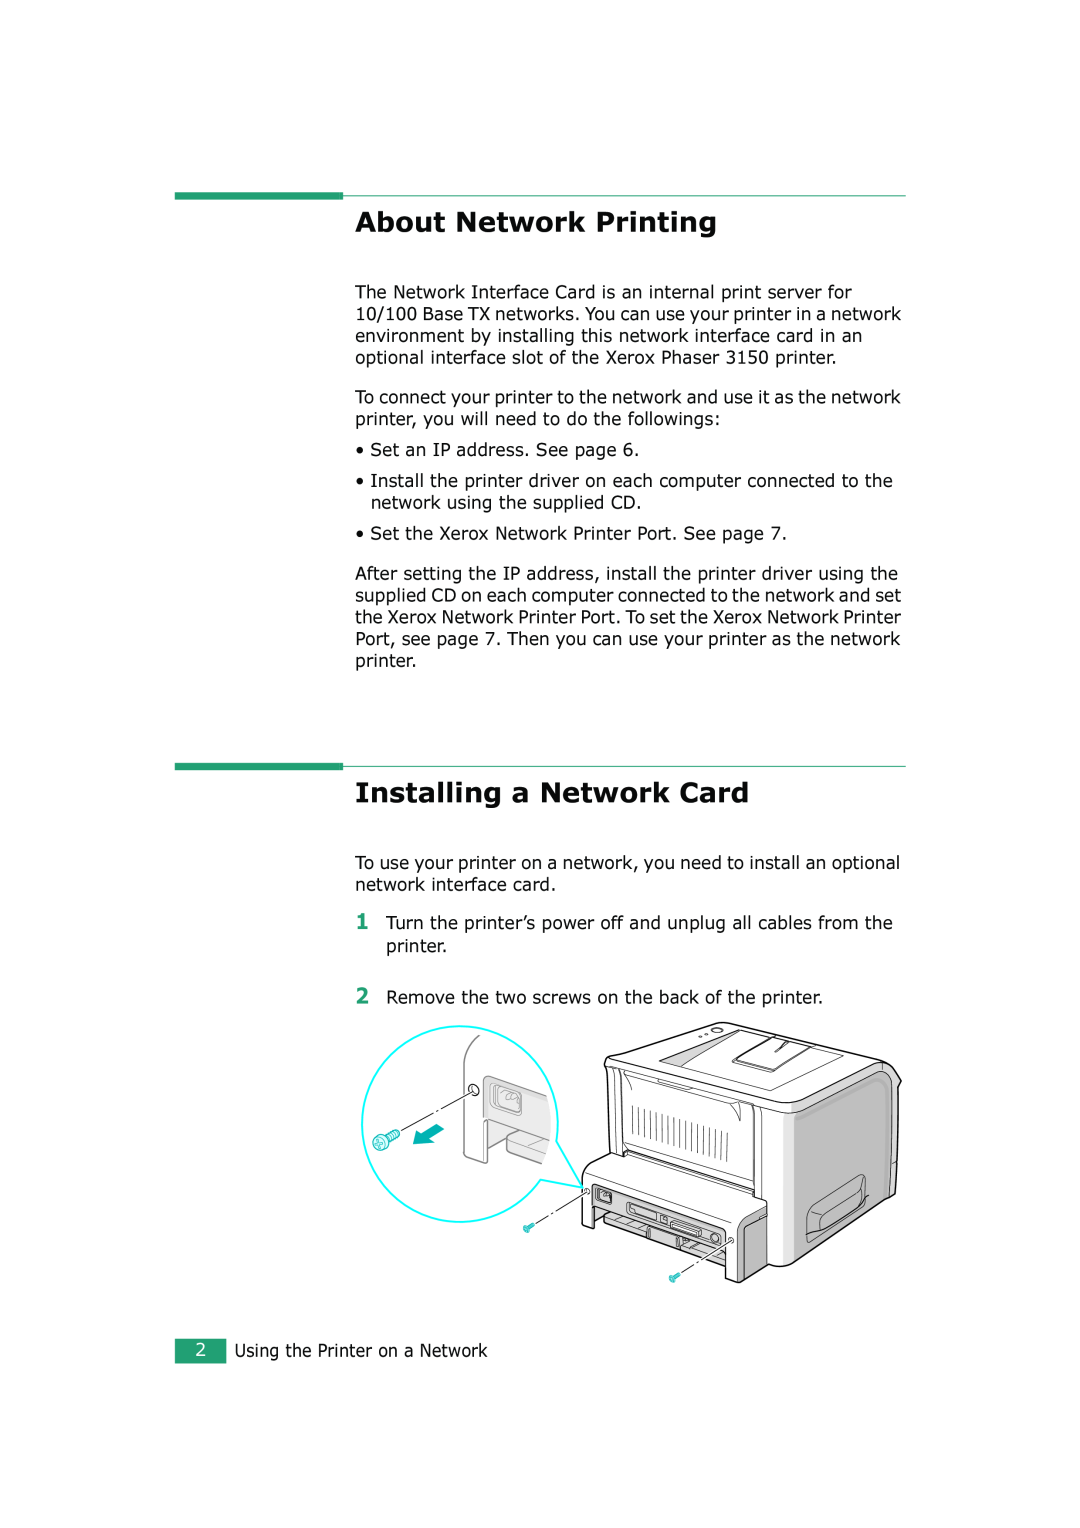 Xerox 3150 manual About Network Printing, Installing a Network Card 